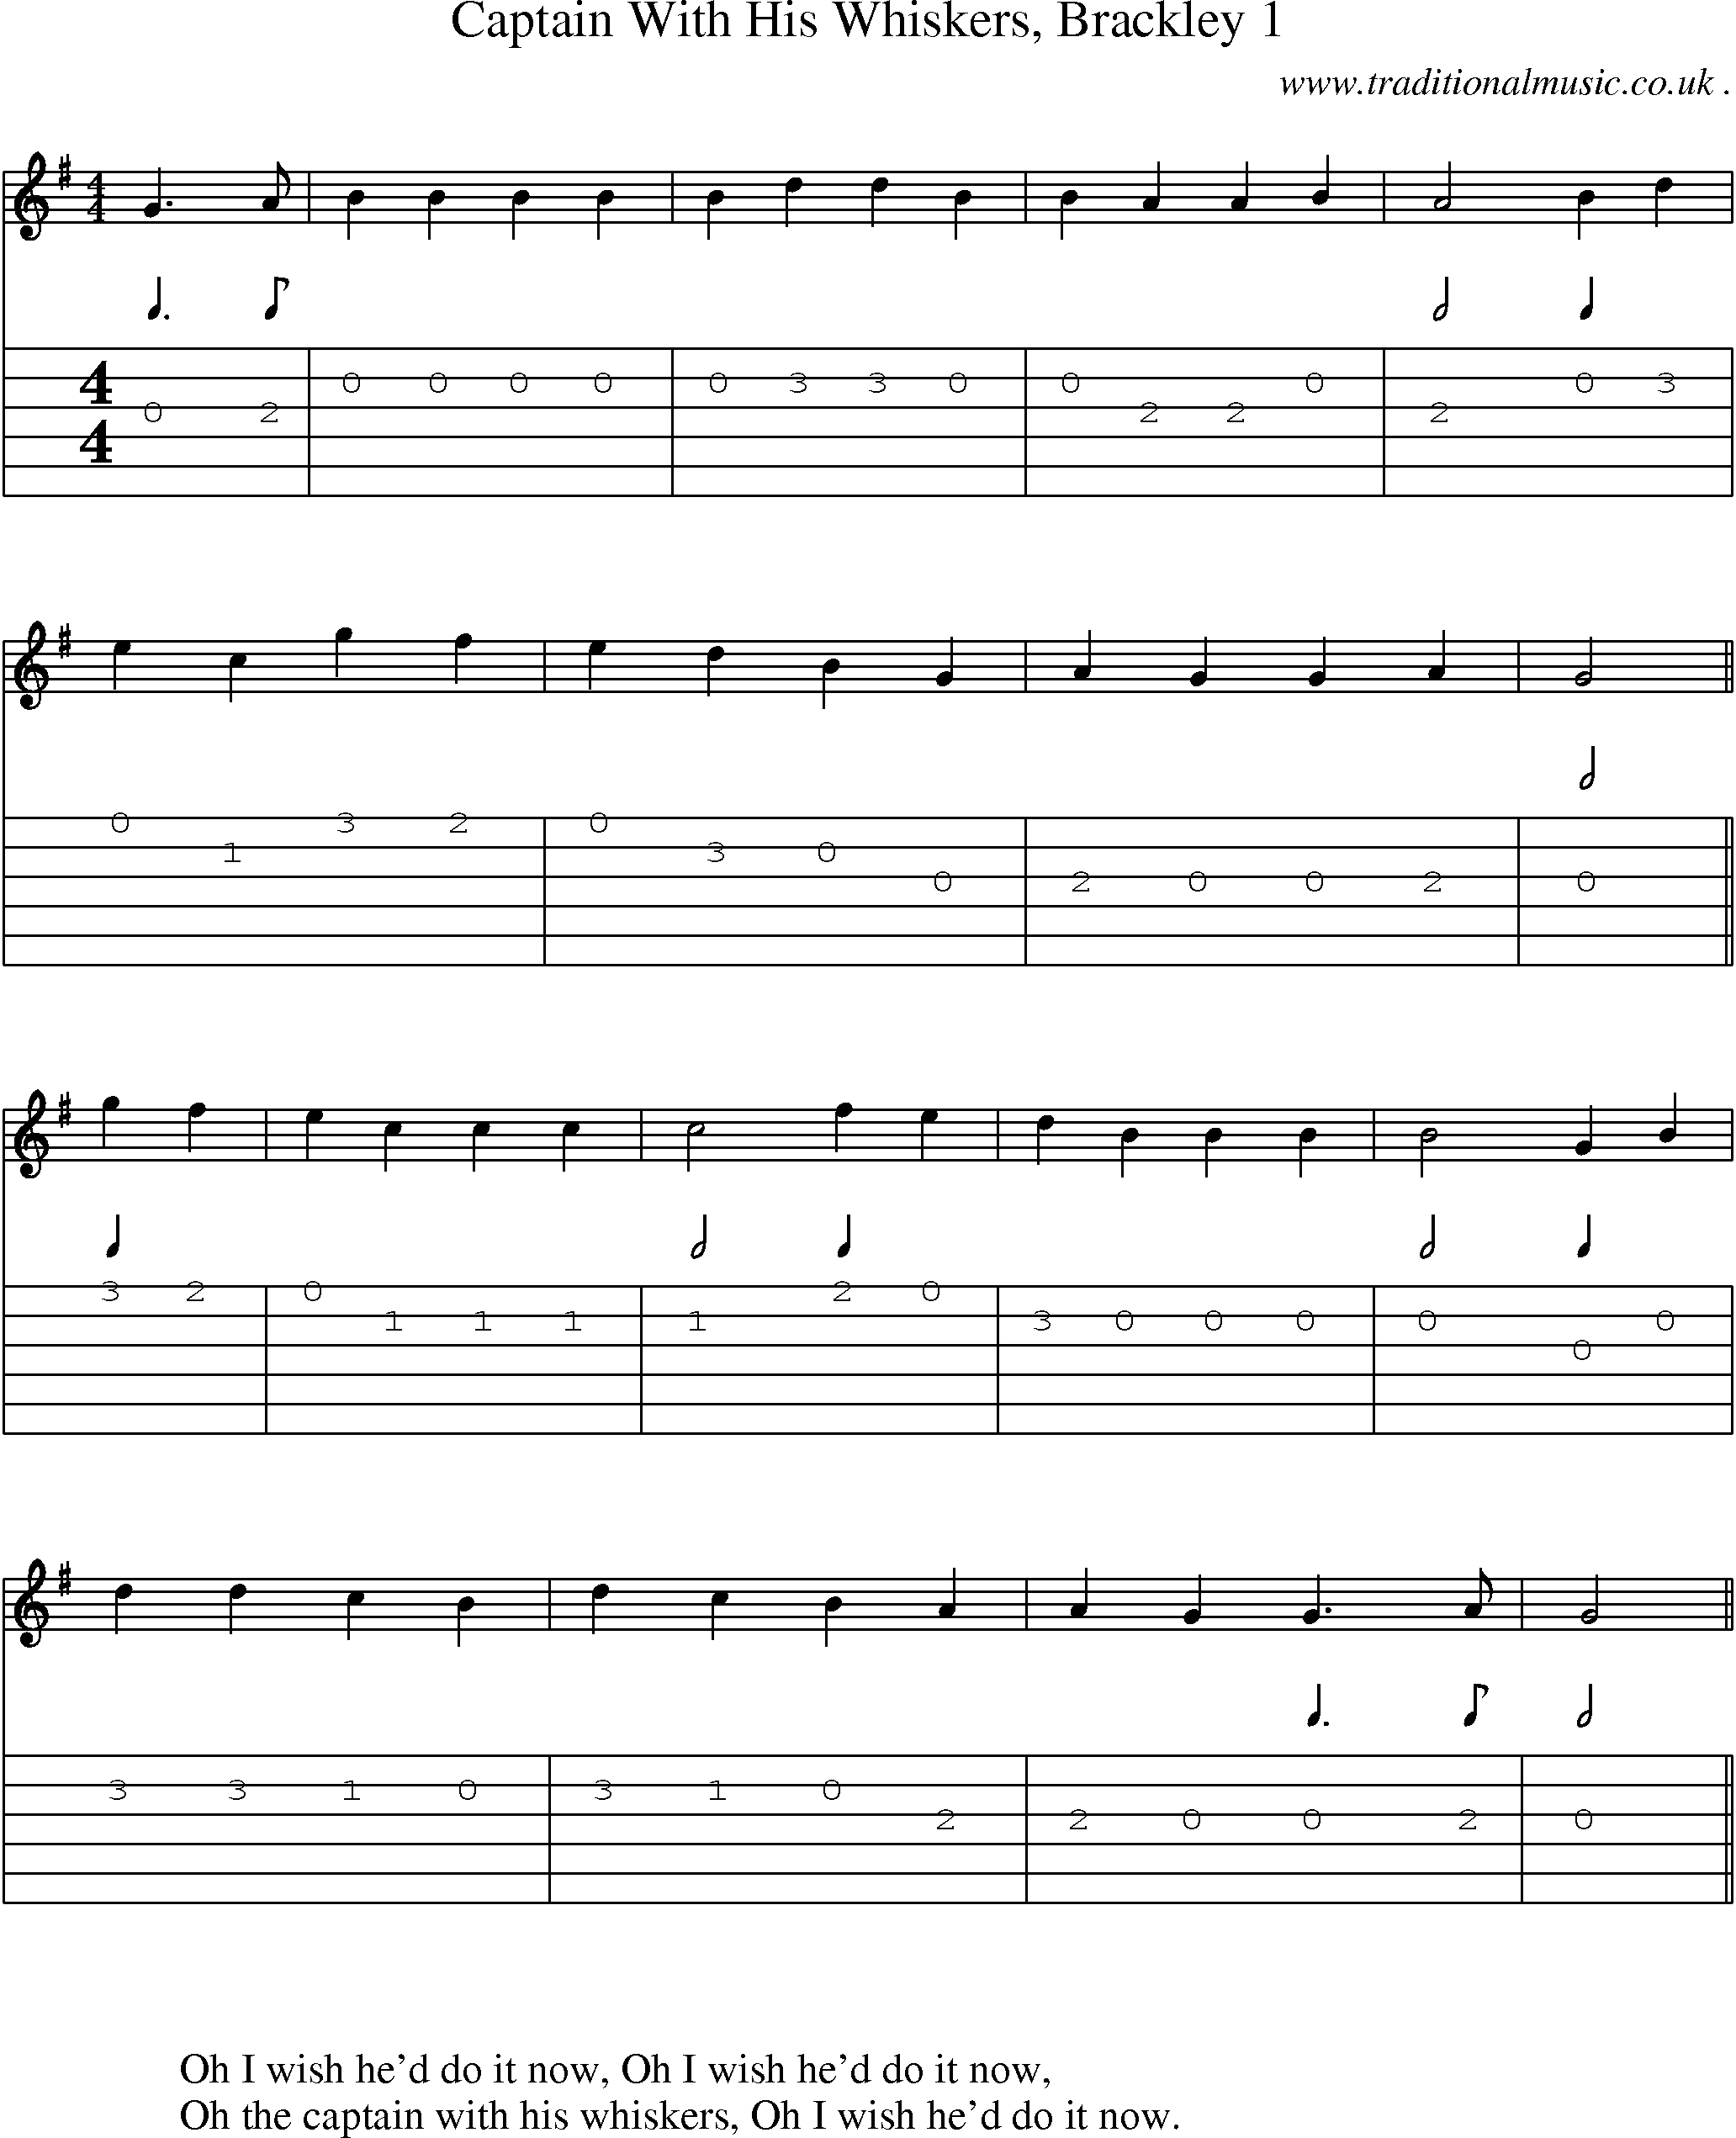 Sheet-Music and Guitar Tabs for Captain With His Whiskers Brackley 1